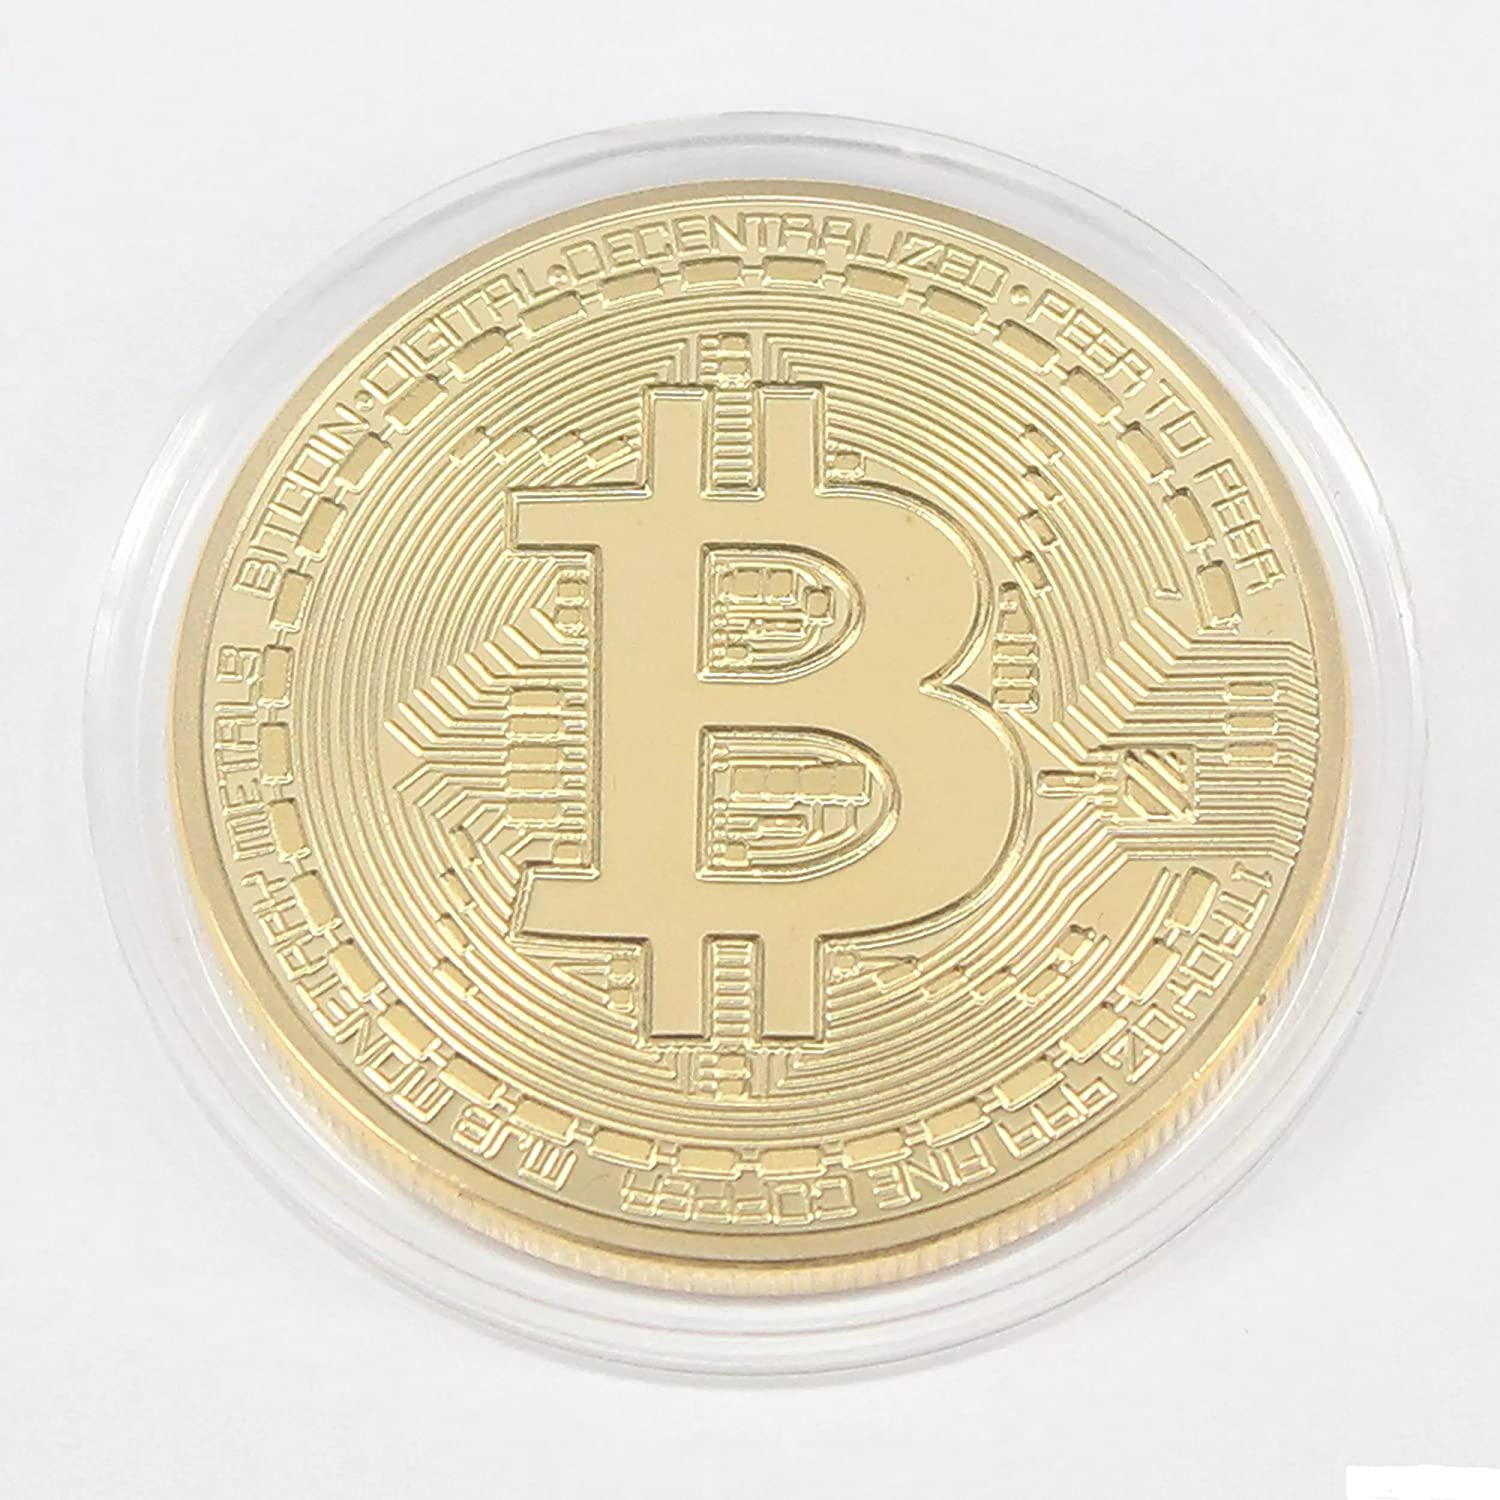 Bitcoin Challenge Coin Deluxe Collector's Set Featuring the Limited Edition Original Commemorative Tokens w/ Display Case - 2 Pcs with Random Color and Design